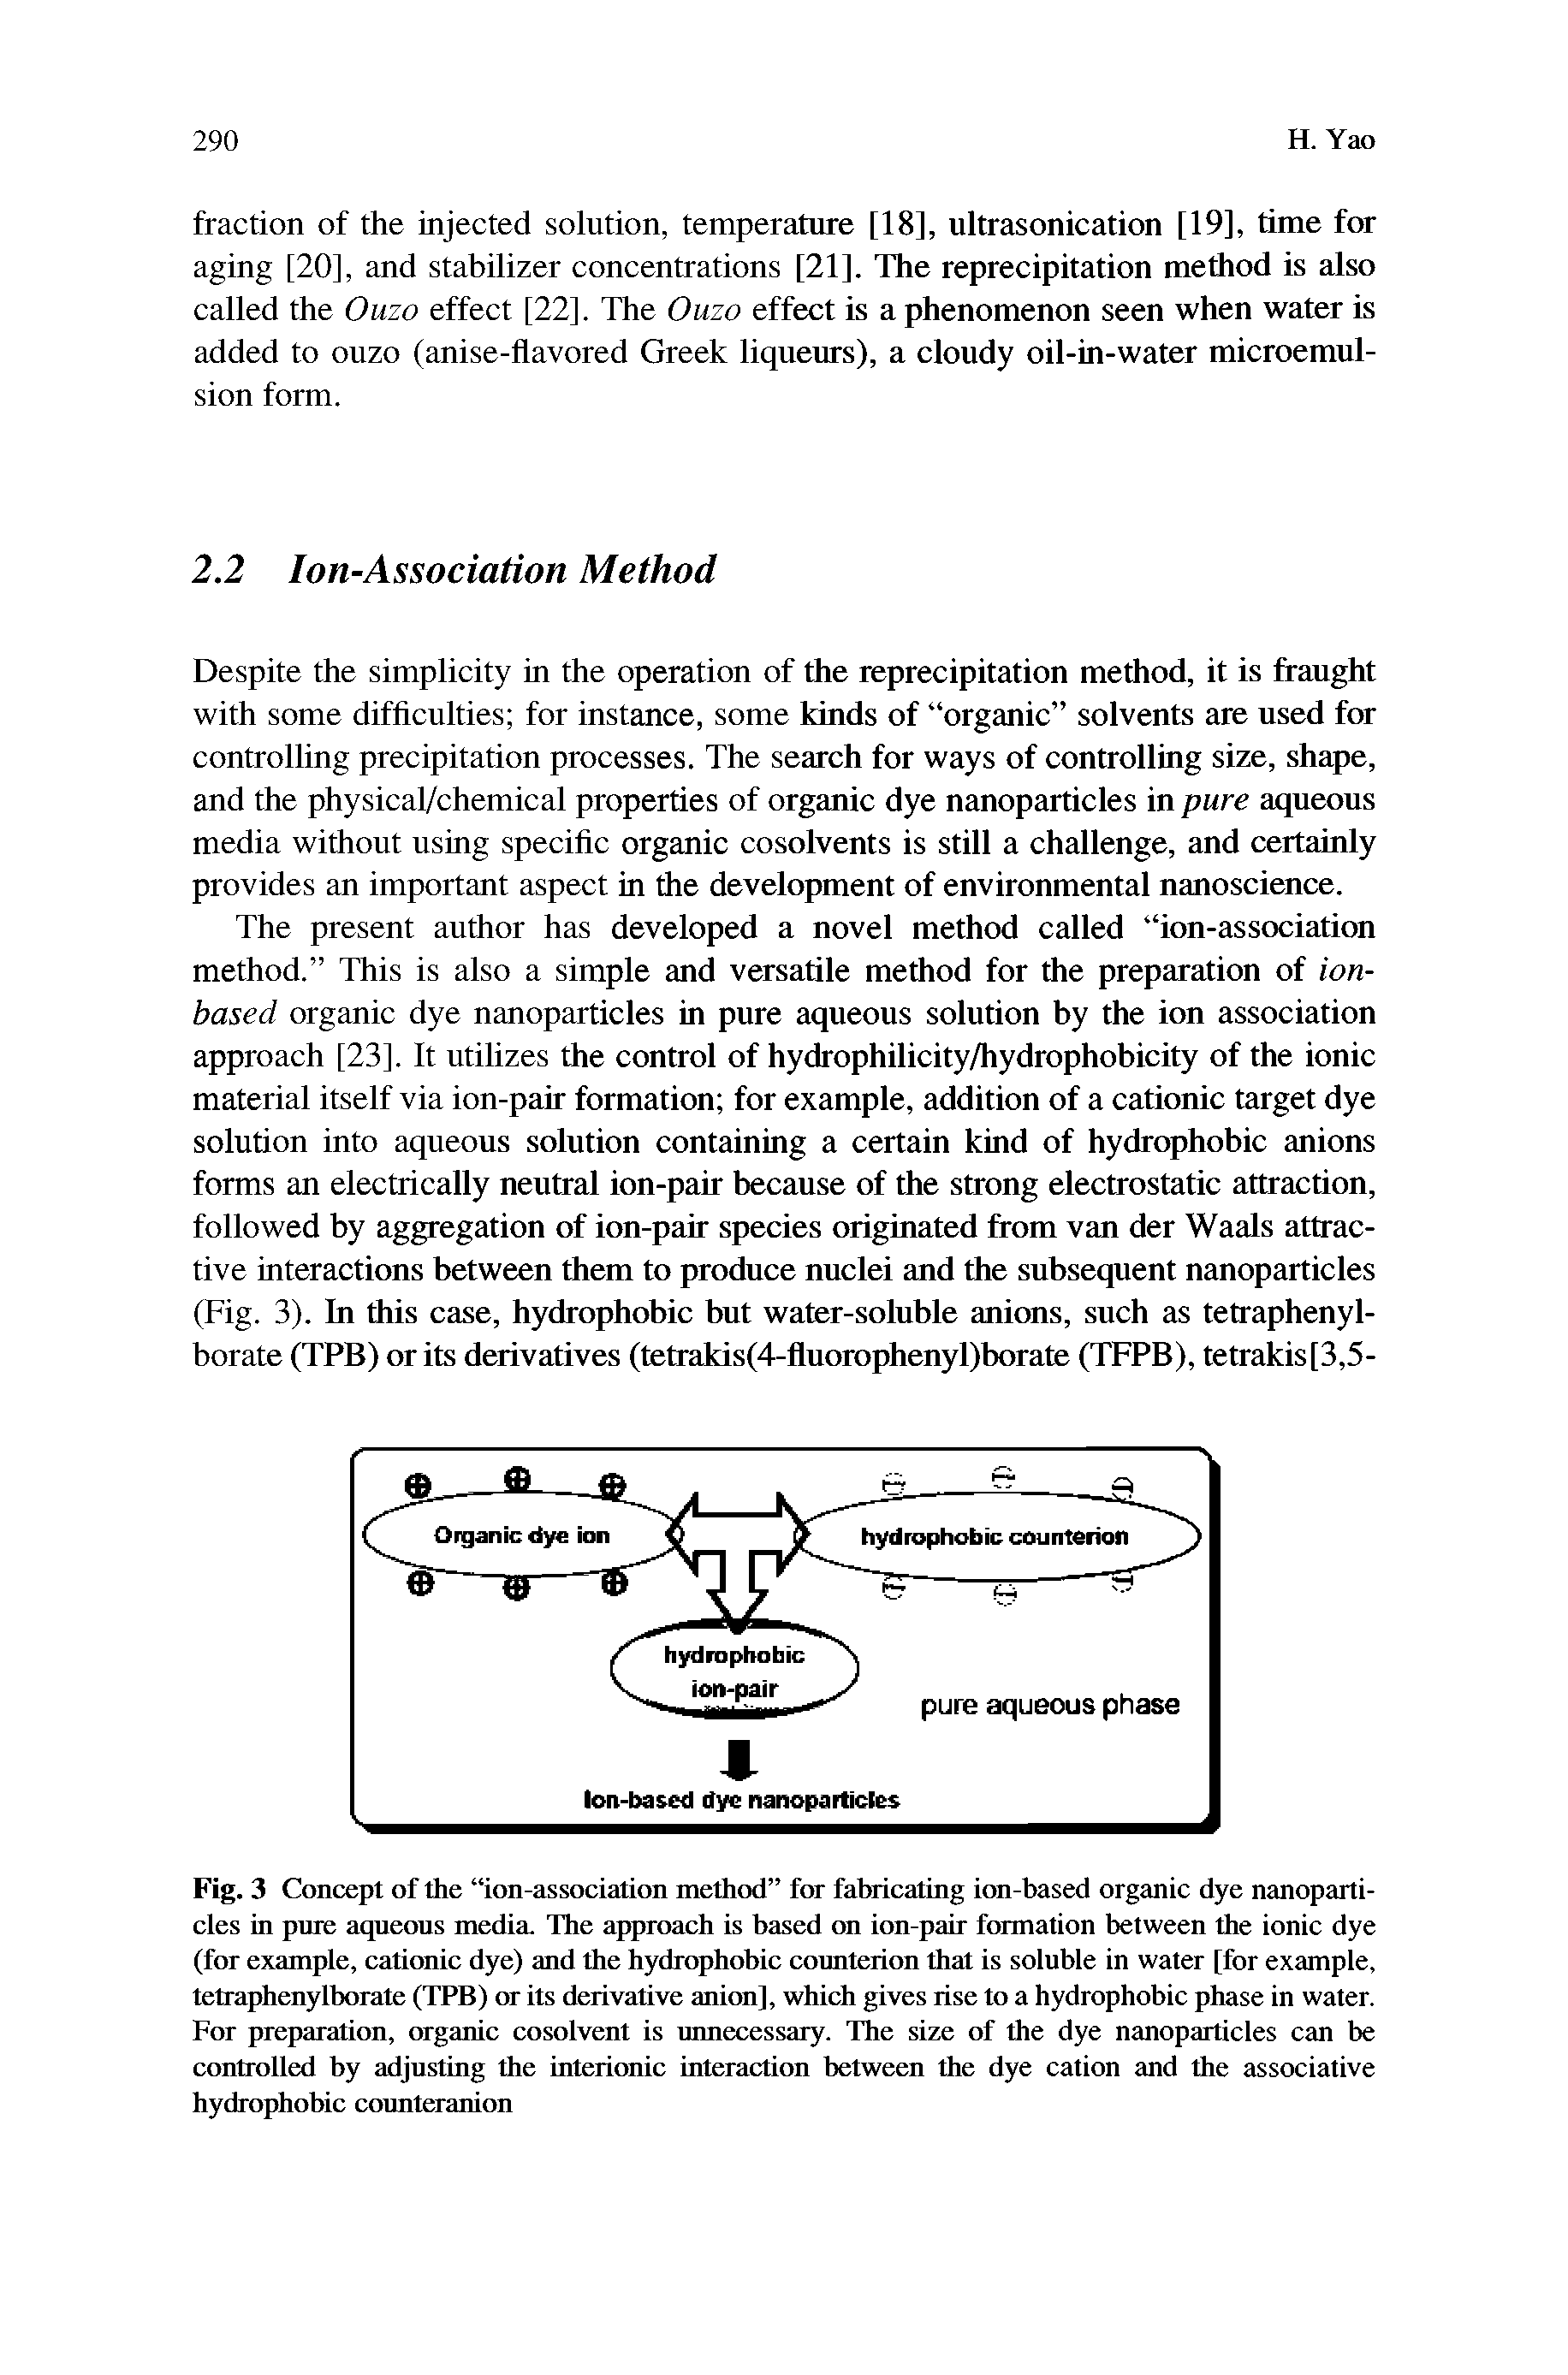 Fig. 3 Concept of the ion-association method for fabricating ion-based organic dye nanoparticles in pure aqueous media. The approach is based on ion-pair formation between the ionic dye (for example, cationic dye) and the hydrophobic counterion that is soluble in water [for example, tetraphenylborate (TPB) or its derivative anion], which gives rise to a hydrophobic phase in water. For preparation, organic cosolvent is unnecessary. The size of the dye nanoparticles can be controlled by adjusting the interionic interaction between the dye cation and the associative hydrophobic counteranion...